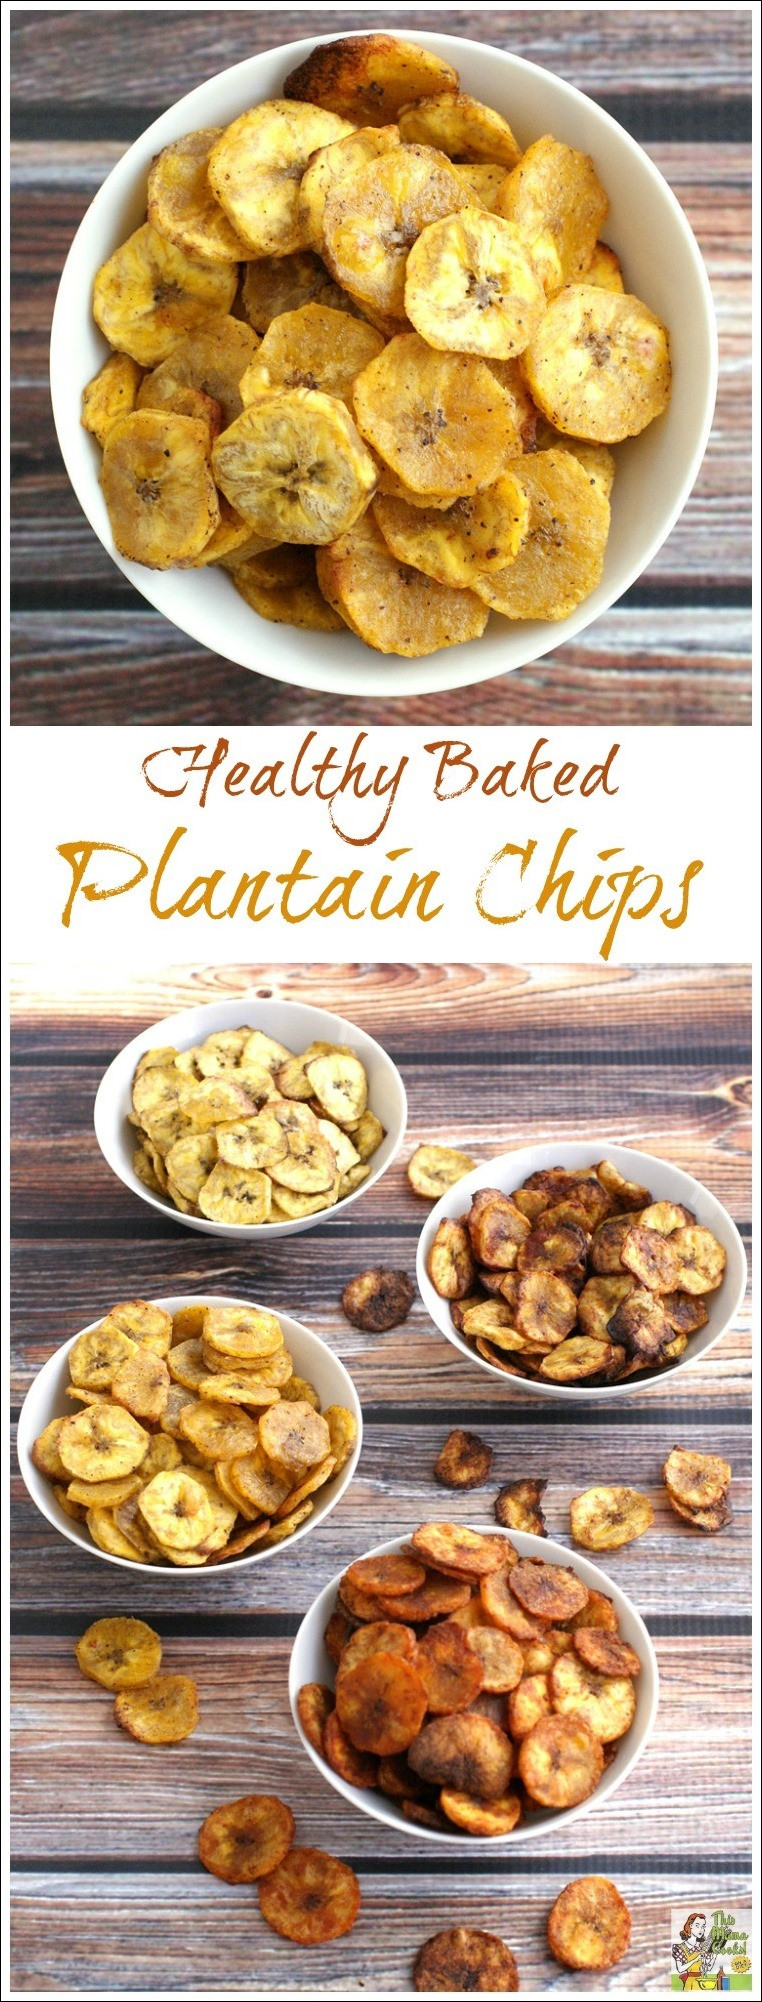 Healthy Baked Snacks Recipes
 Healthy Baked Plantain Chips Four Ways